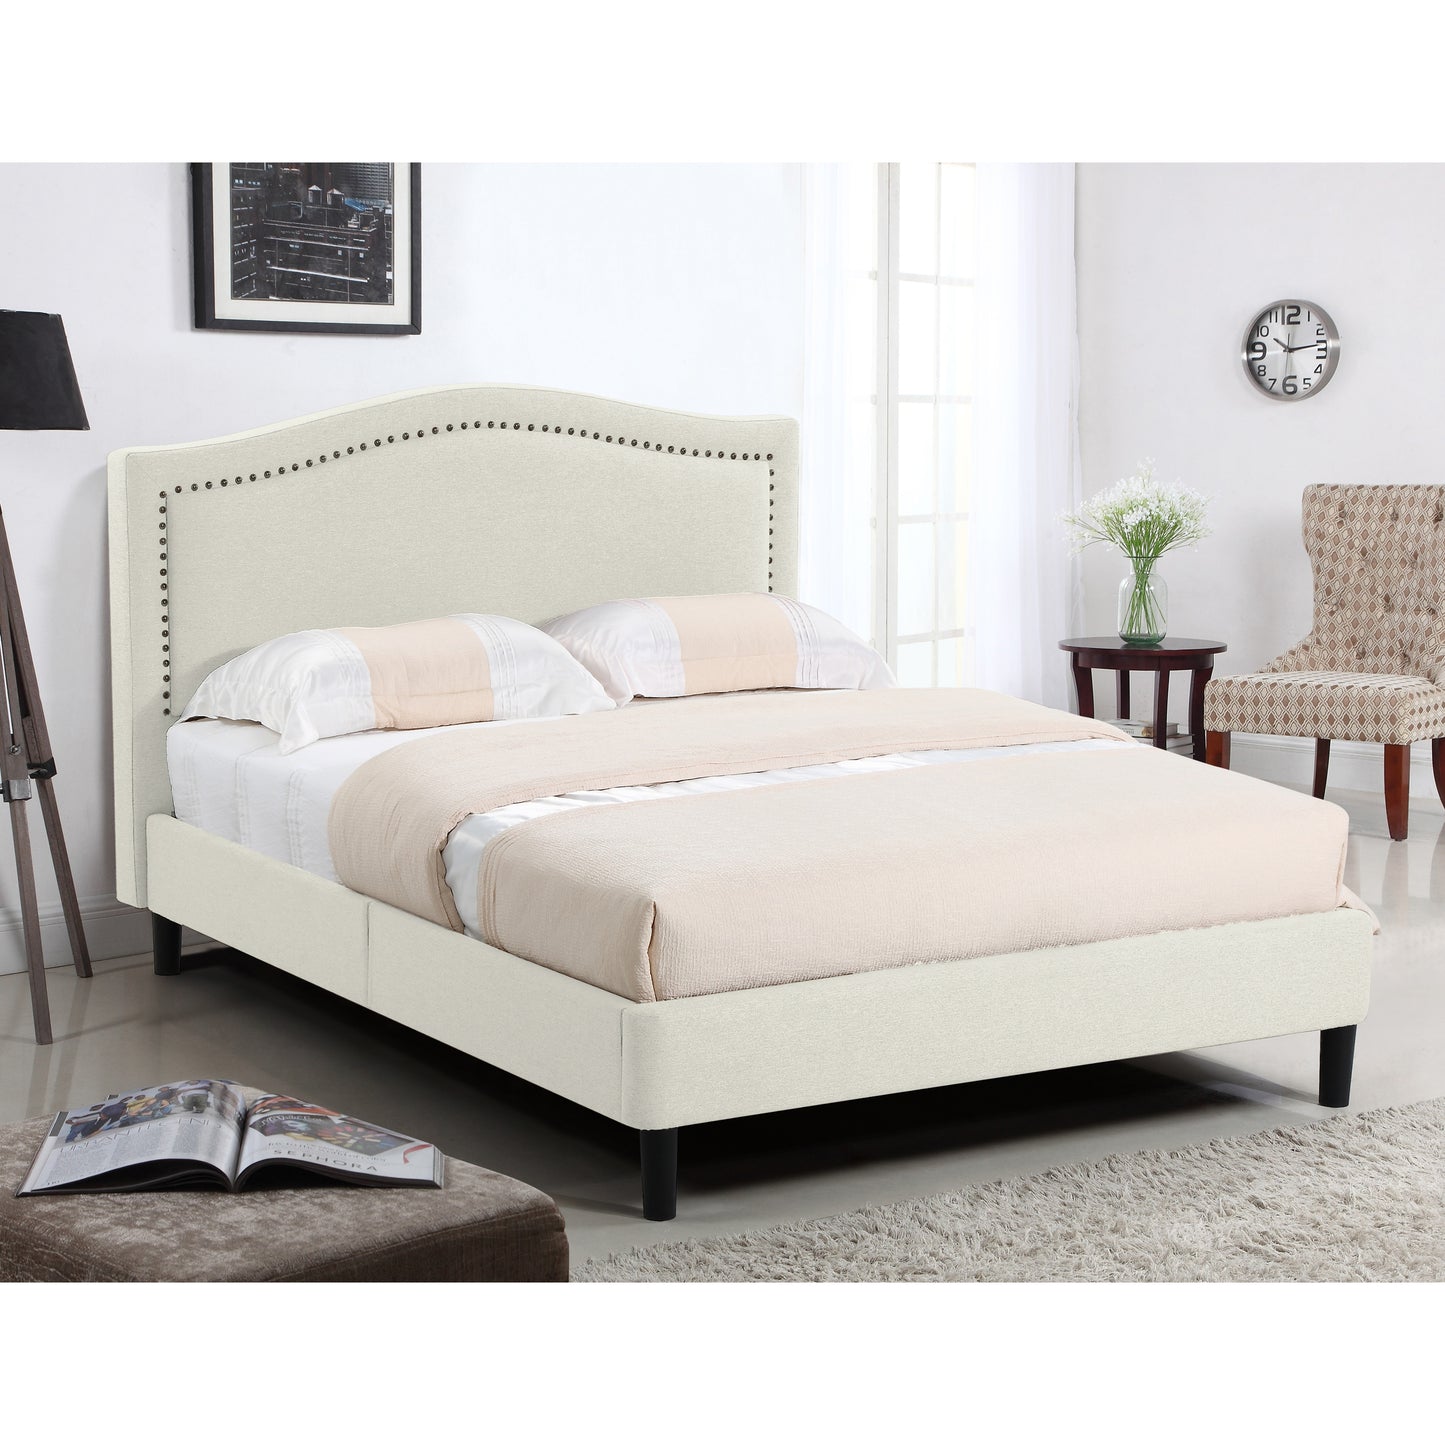 Aloha Beige Upholstered Platform Bed with Decorative Nail Heads Queen Size